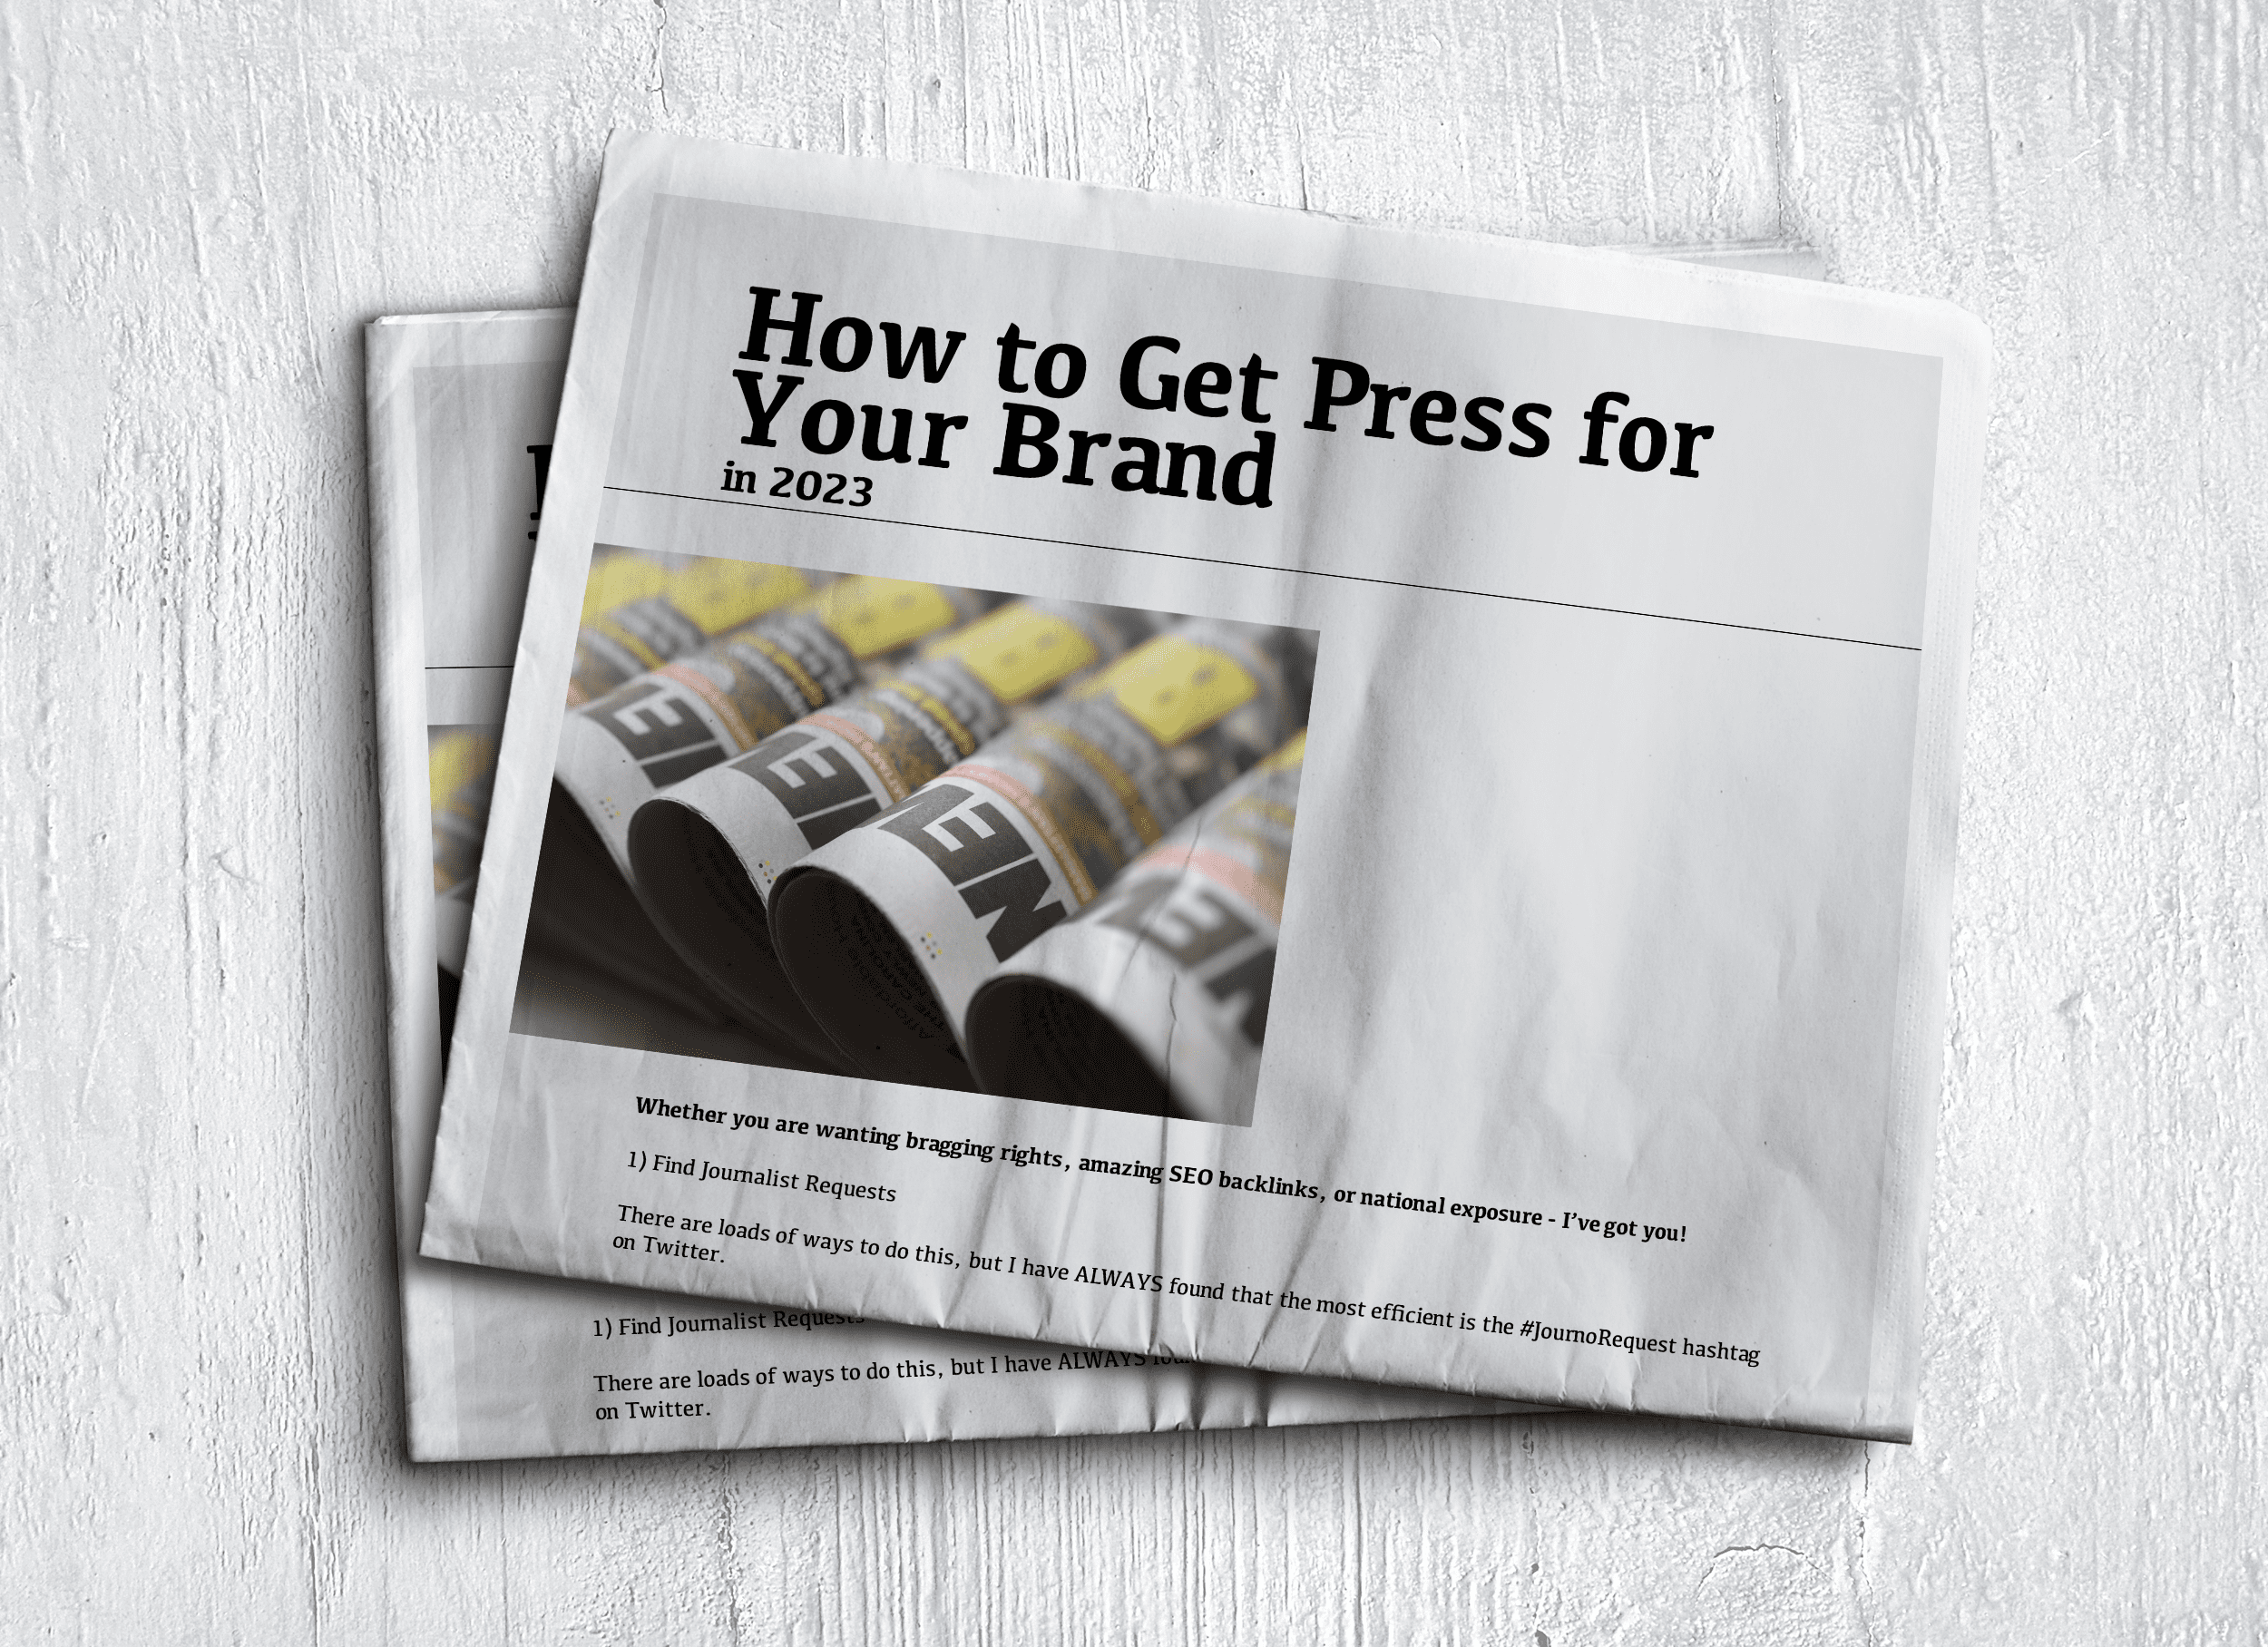 How to Get Press for Your Brand in 2023